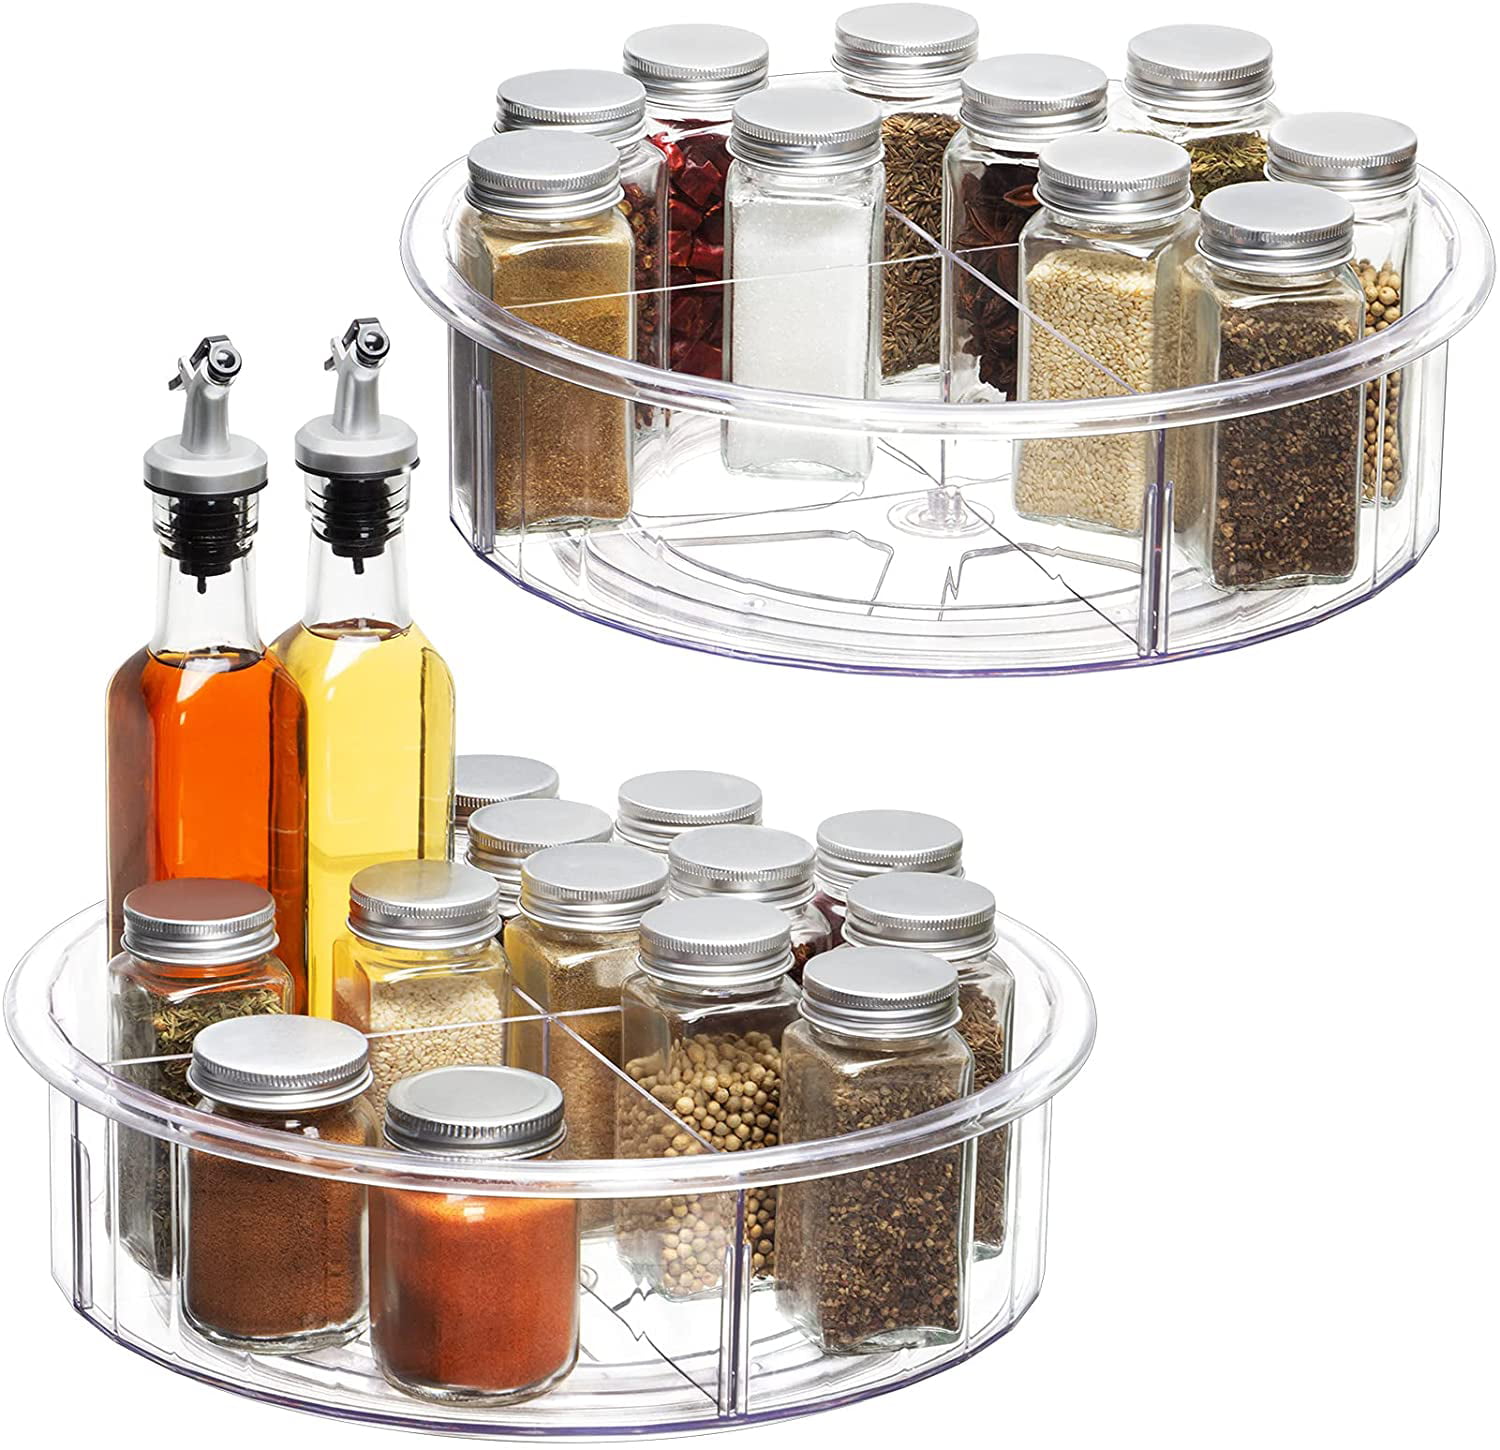 Pantry Organization And Storage For Kitchen Fridge Vanity Bathroom Countertop Makeup Lazy Susan Turntable Organizer 12 Inch Round Clear Lazy Susan Cabinet Organizer Spice Rack